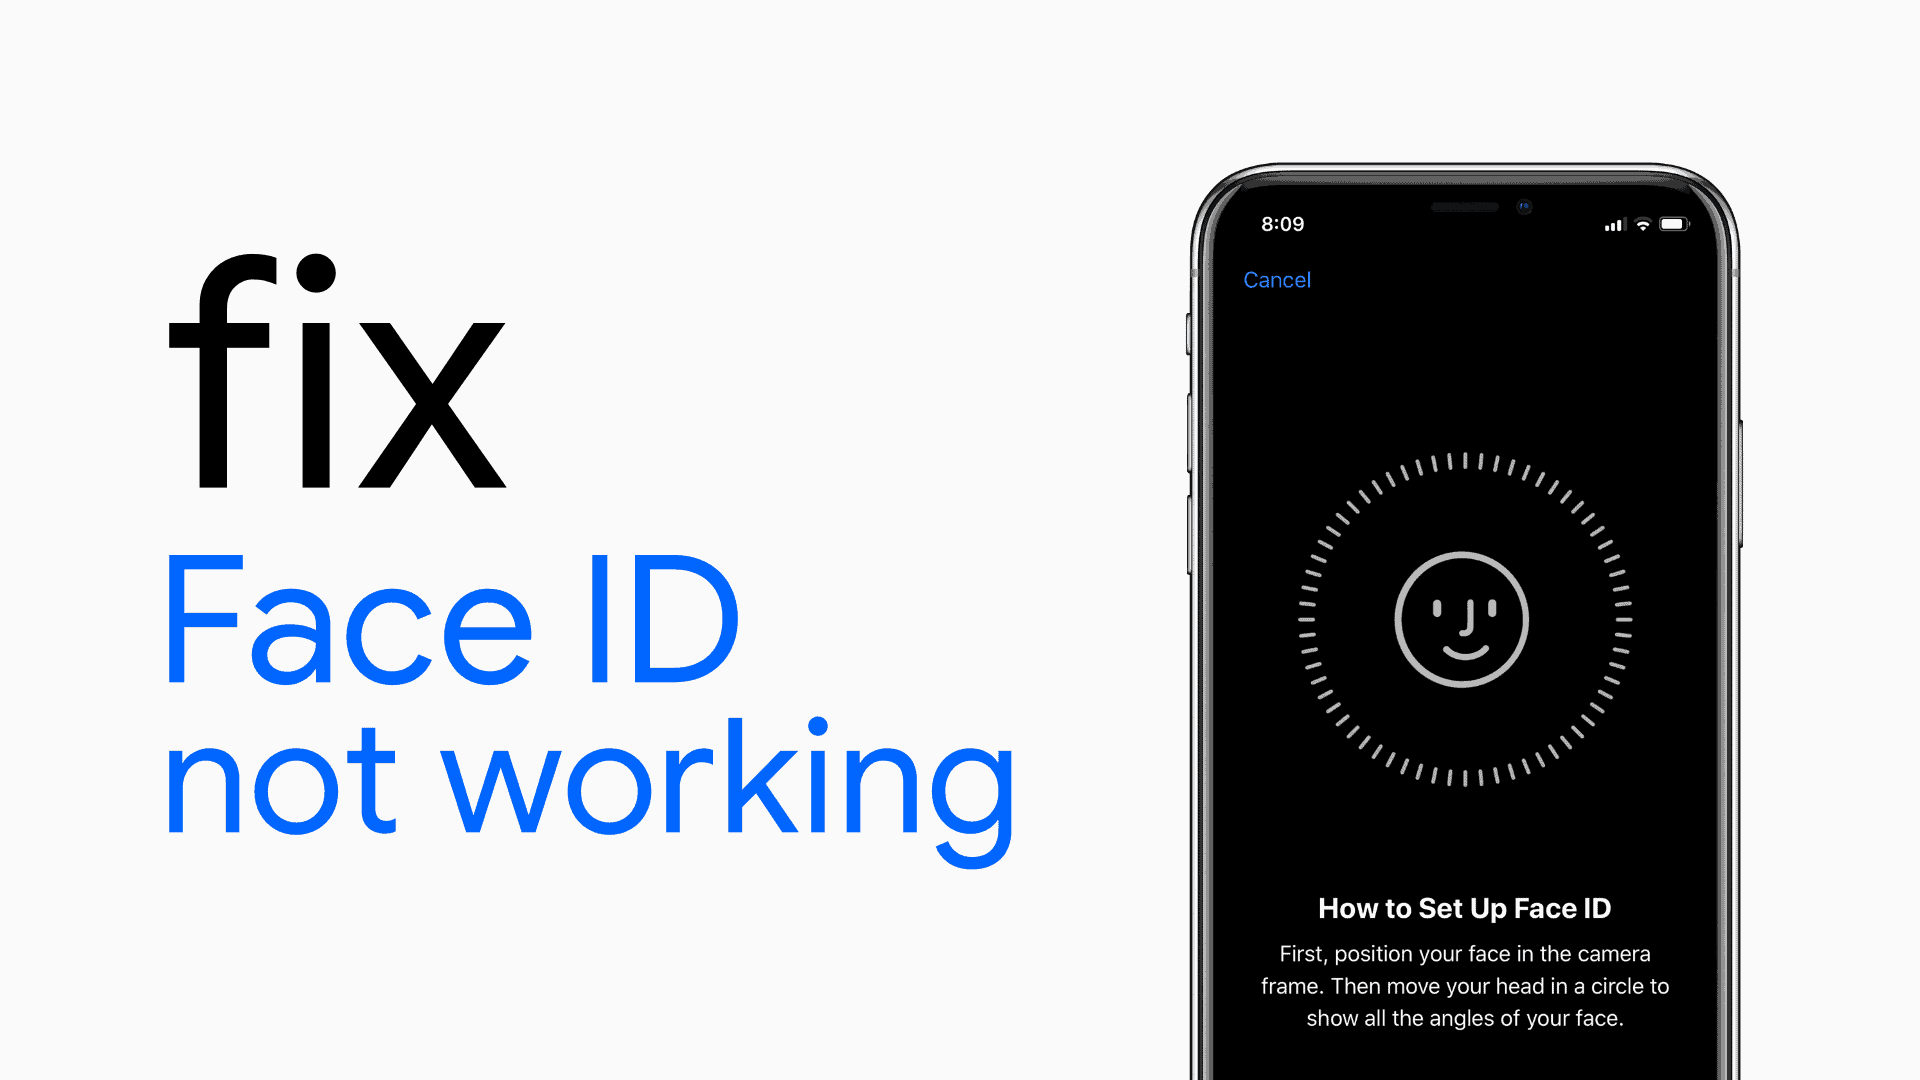 Face ID not working on iPhone XS and XS Max? Here's the real FIX